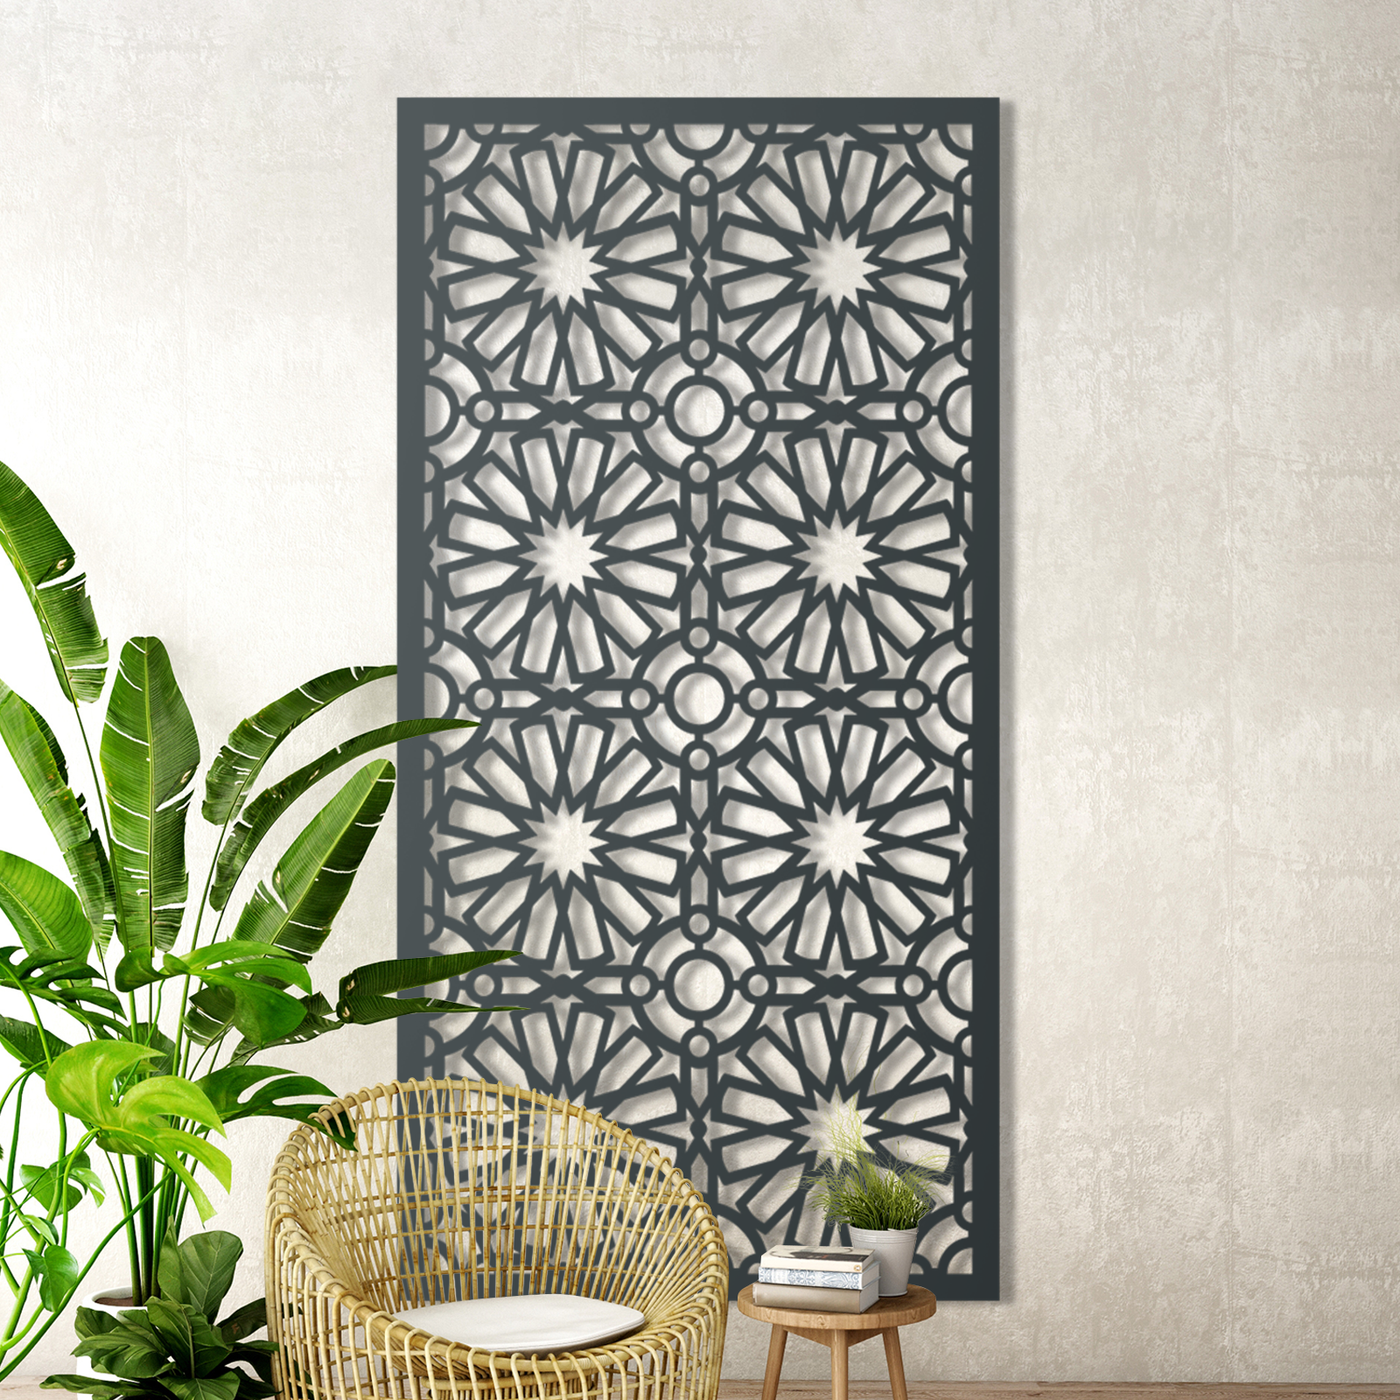 Sunflower Patch Metal Screen: Add Beauty to Your Garden